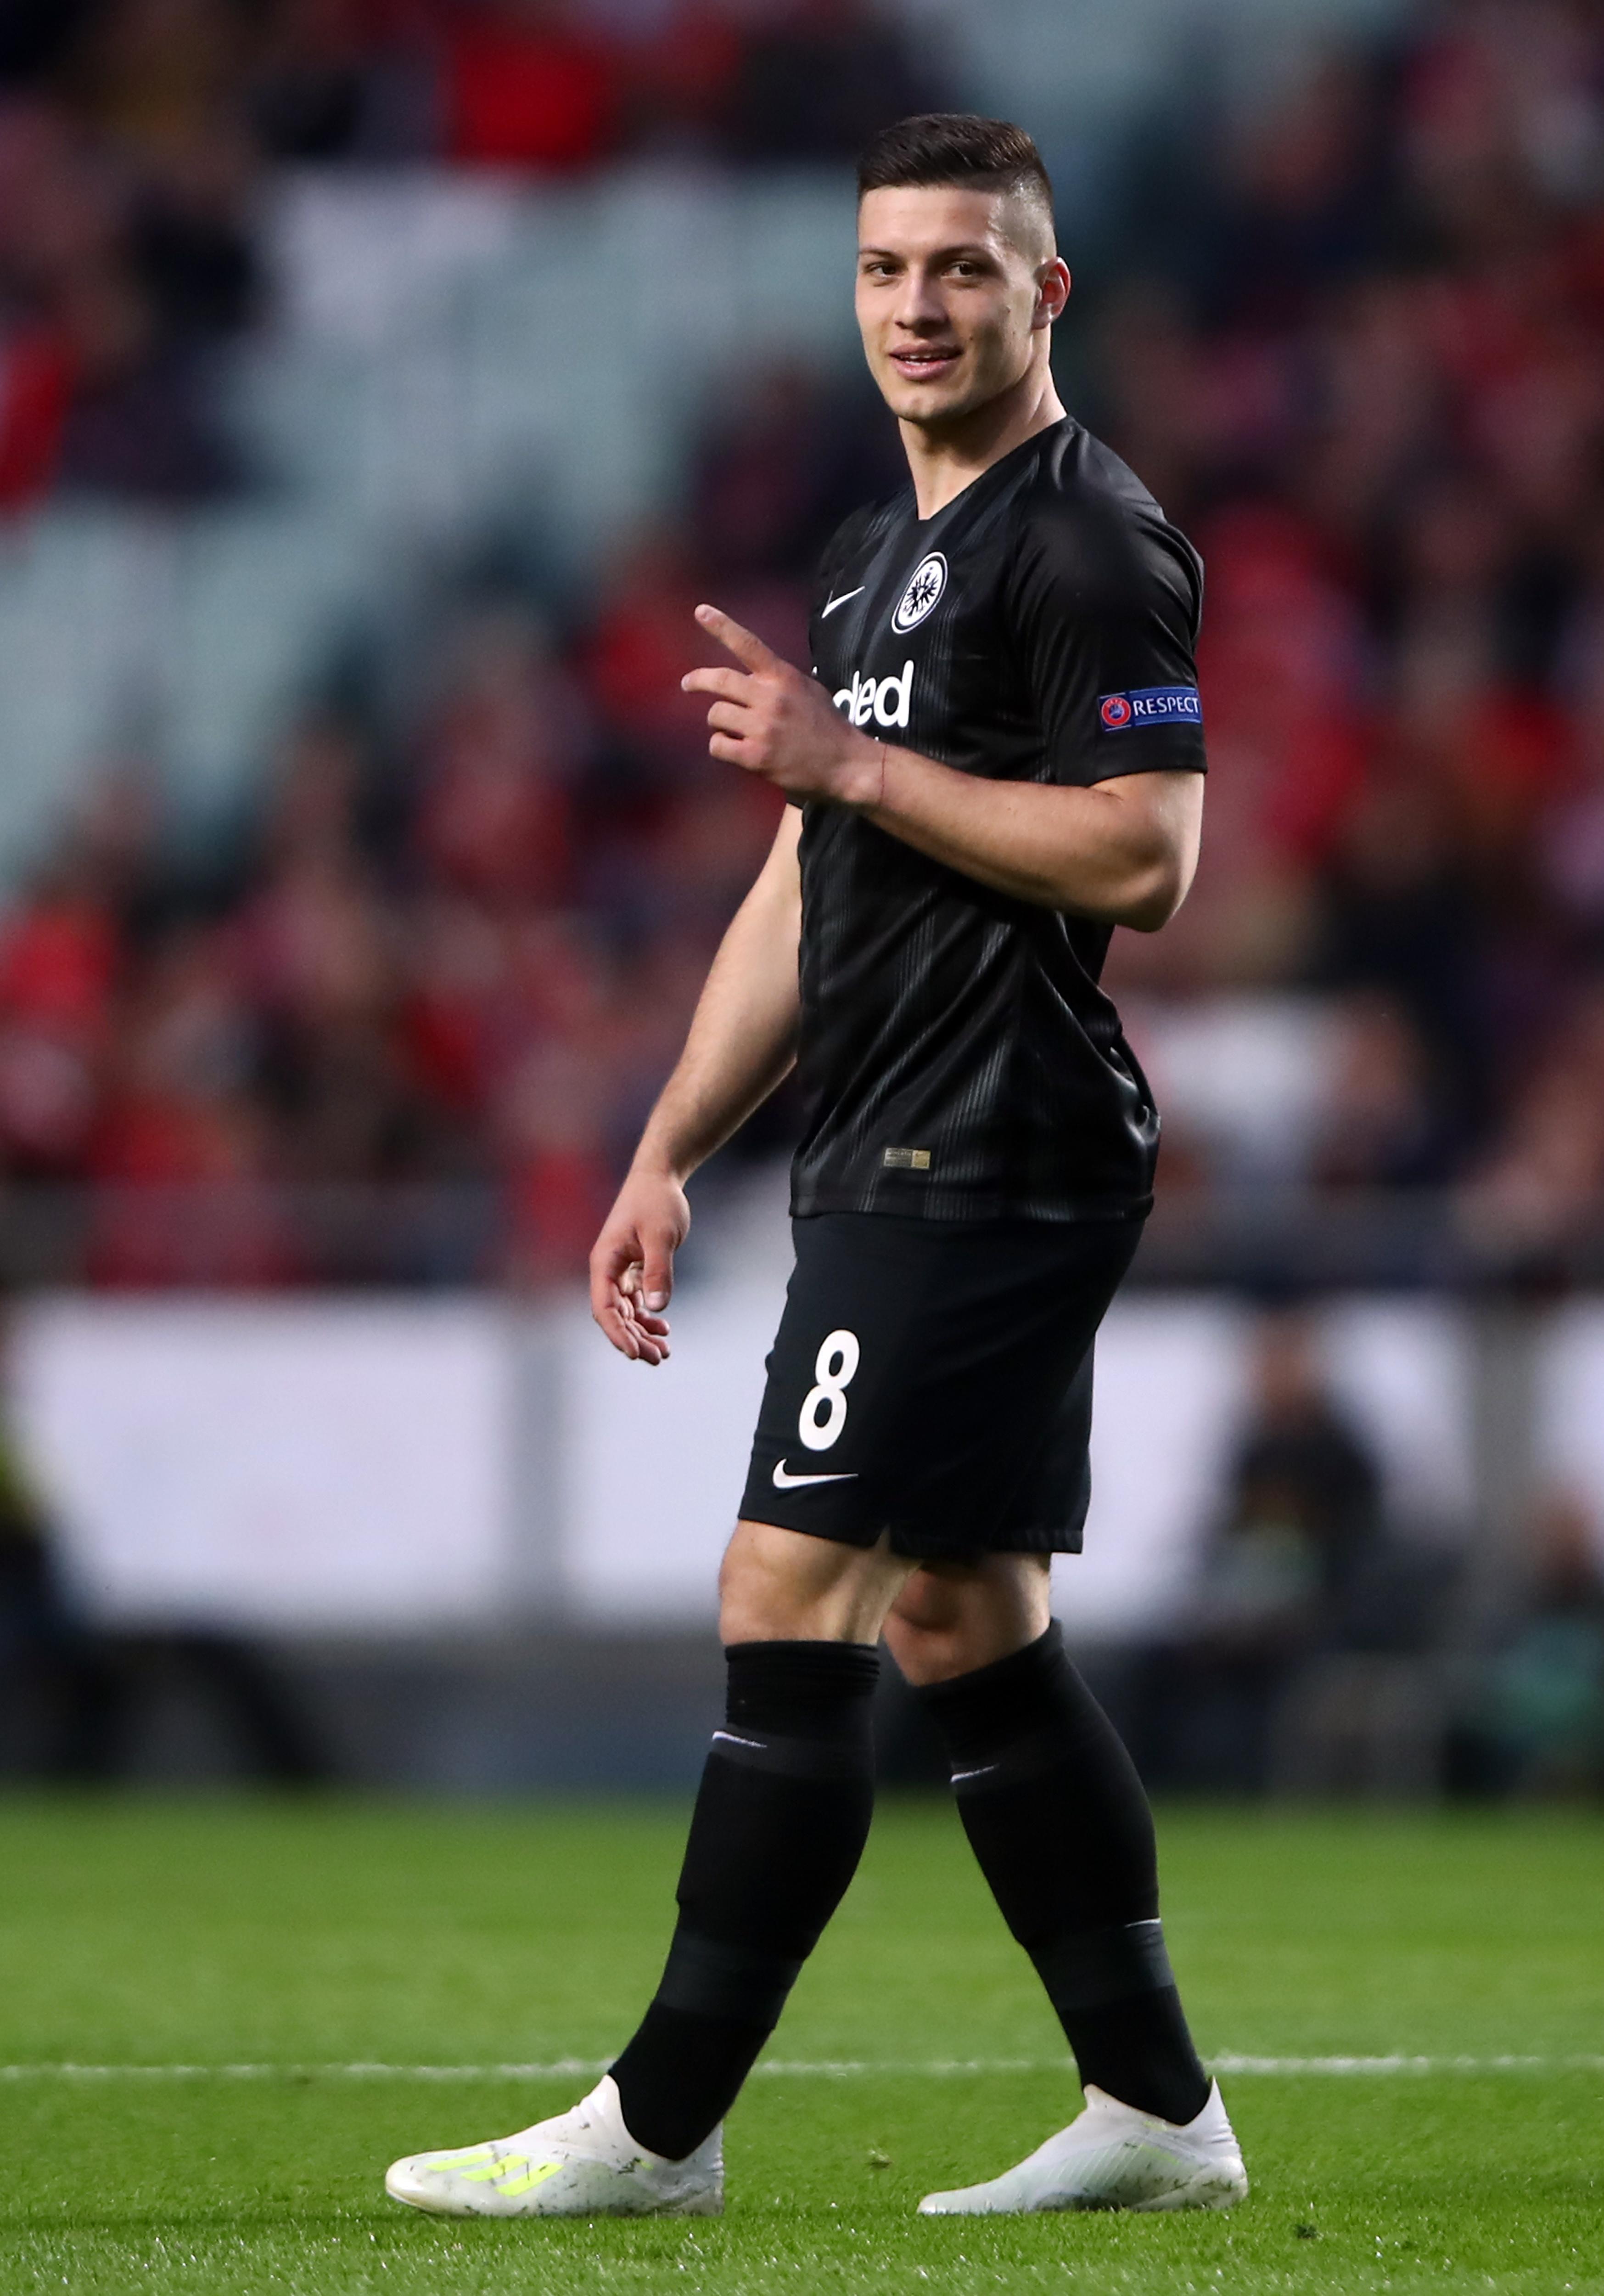 Real Madrid Finalizing Transfer of Luka Jovic for €60 Million—Report